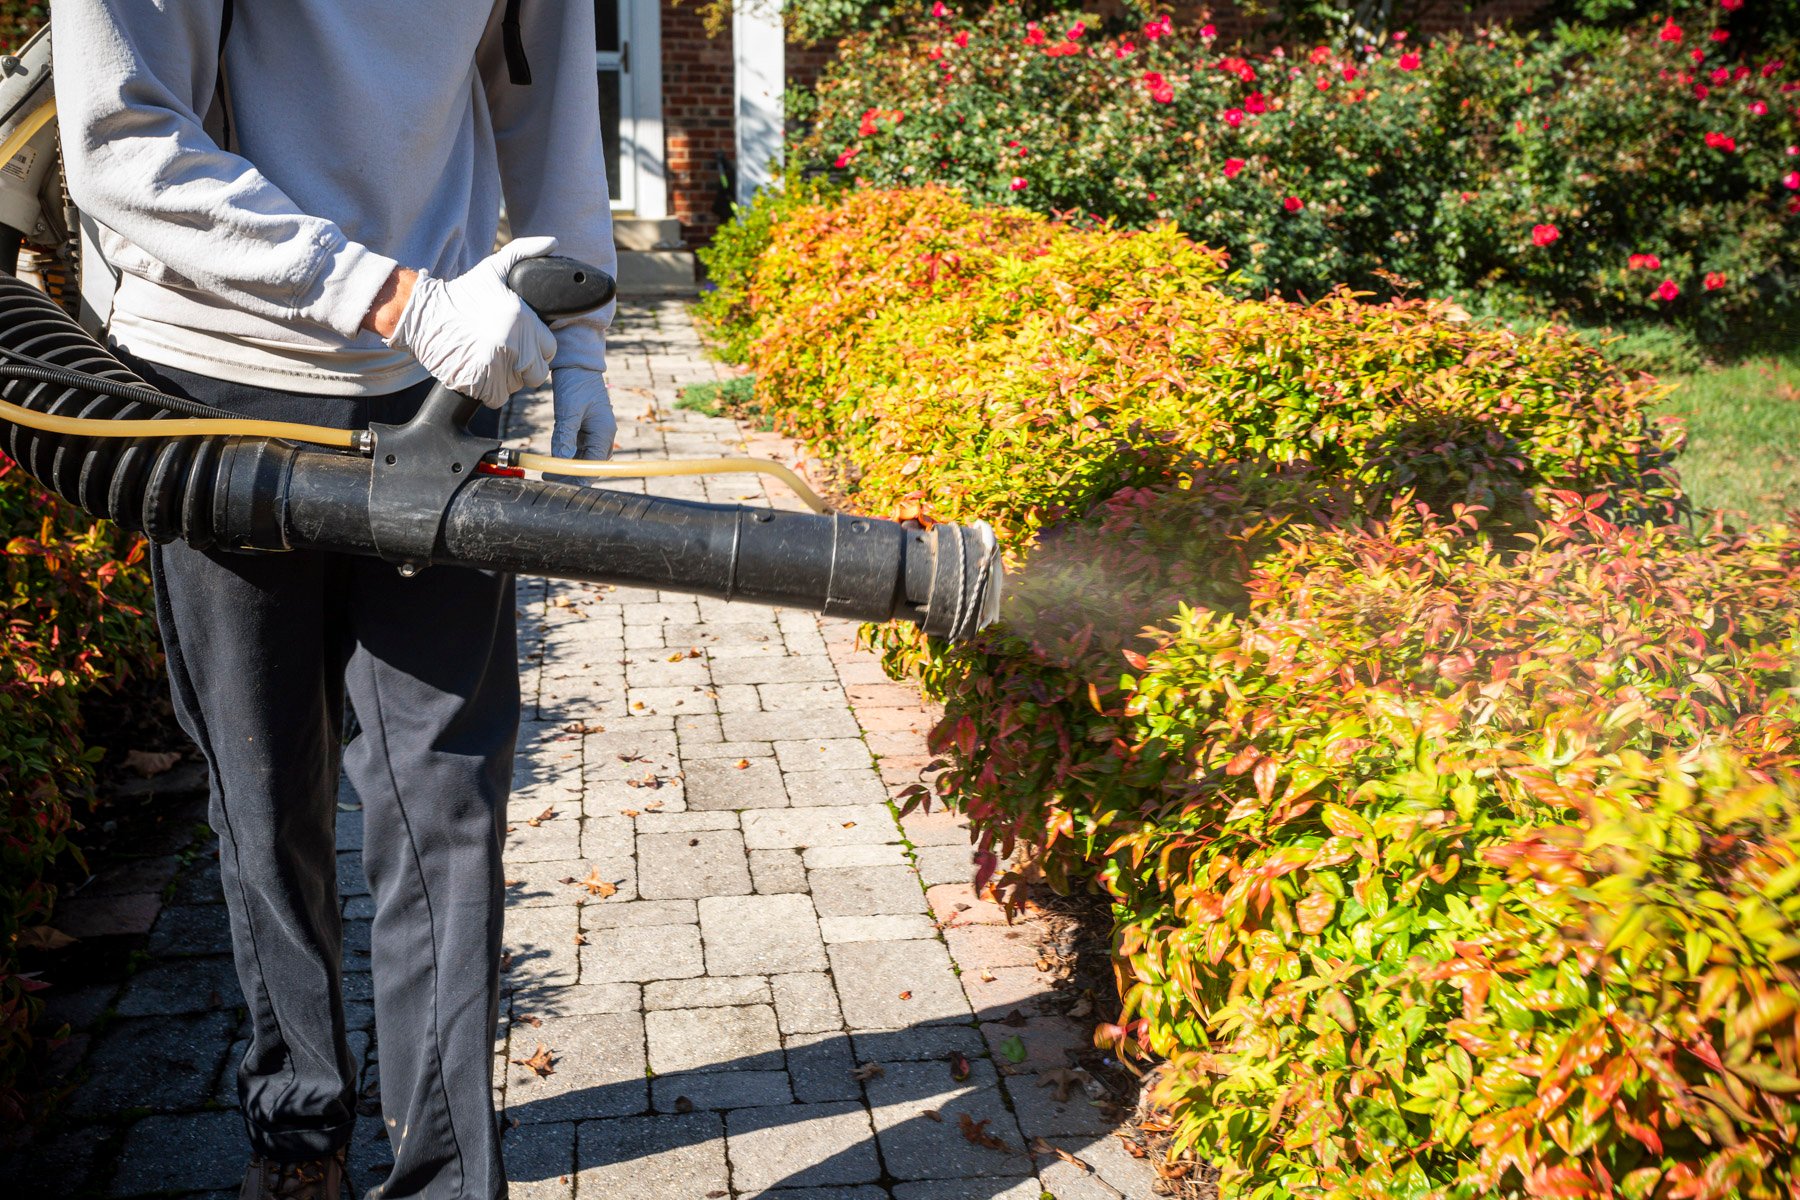 pest control technician apply mosquito barrier spray to landscape planting beds